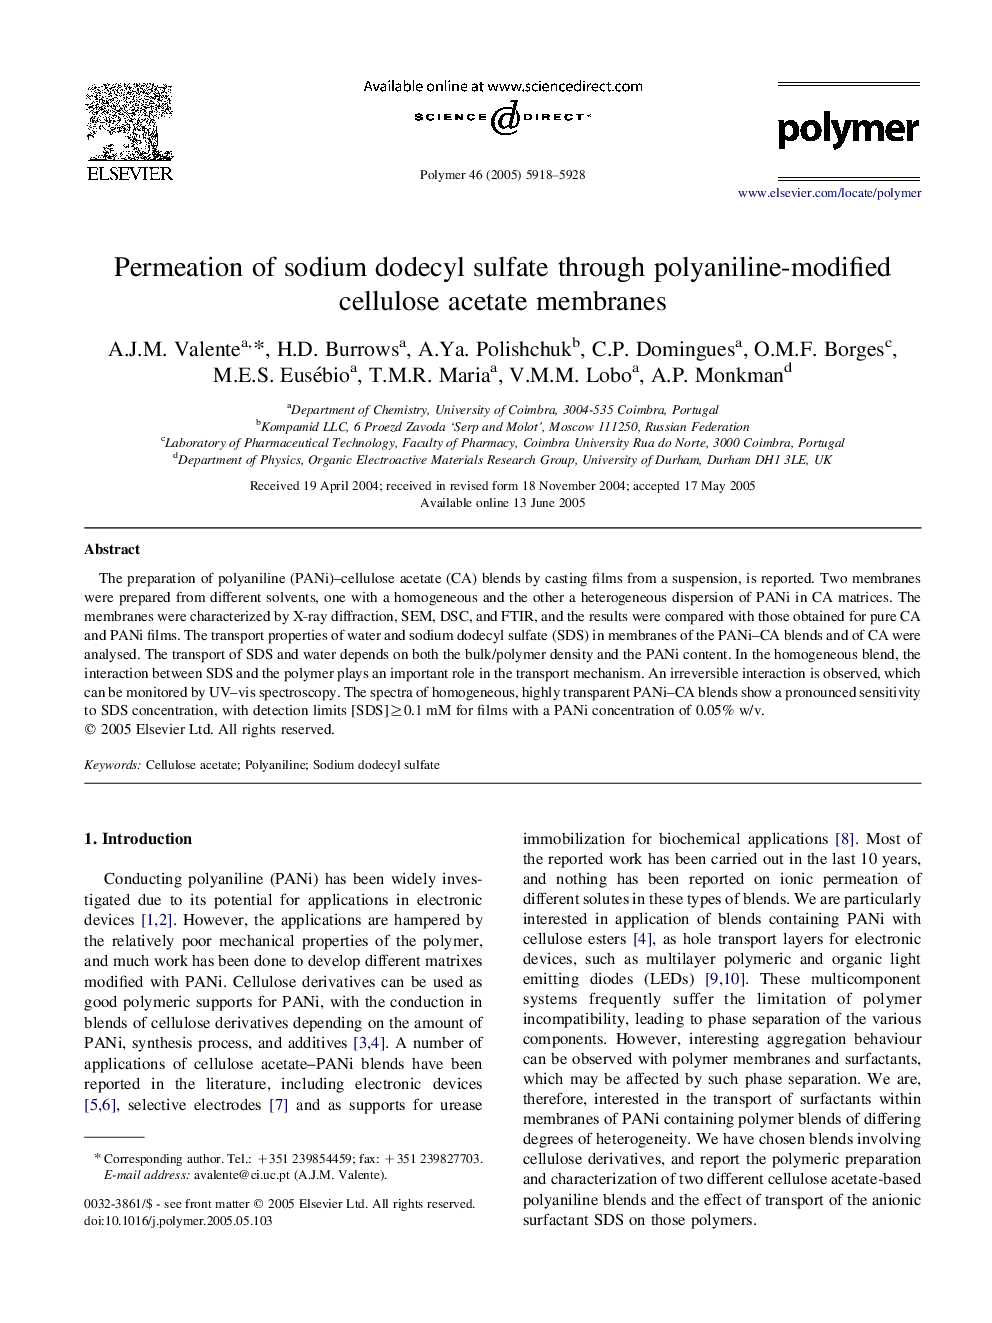 Permeation of sodium dodecyl sulfate through polyaniline-modified cellulose acetate membranes